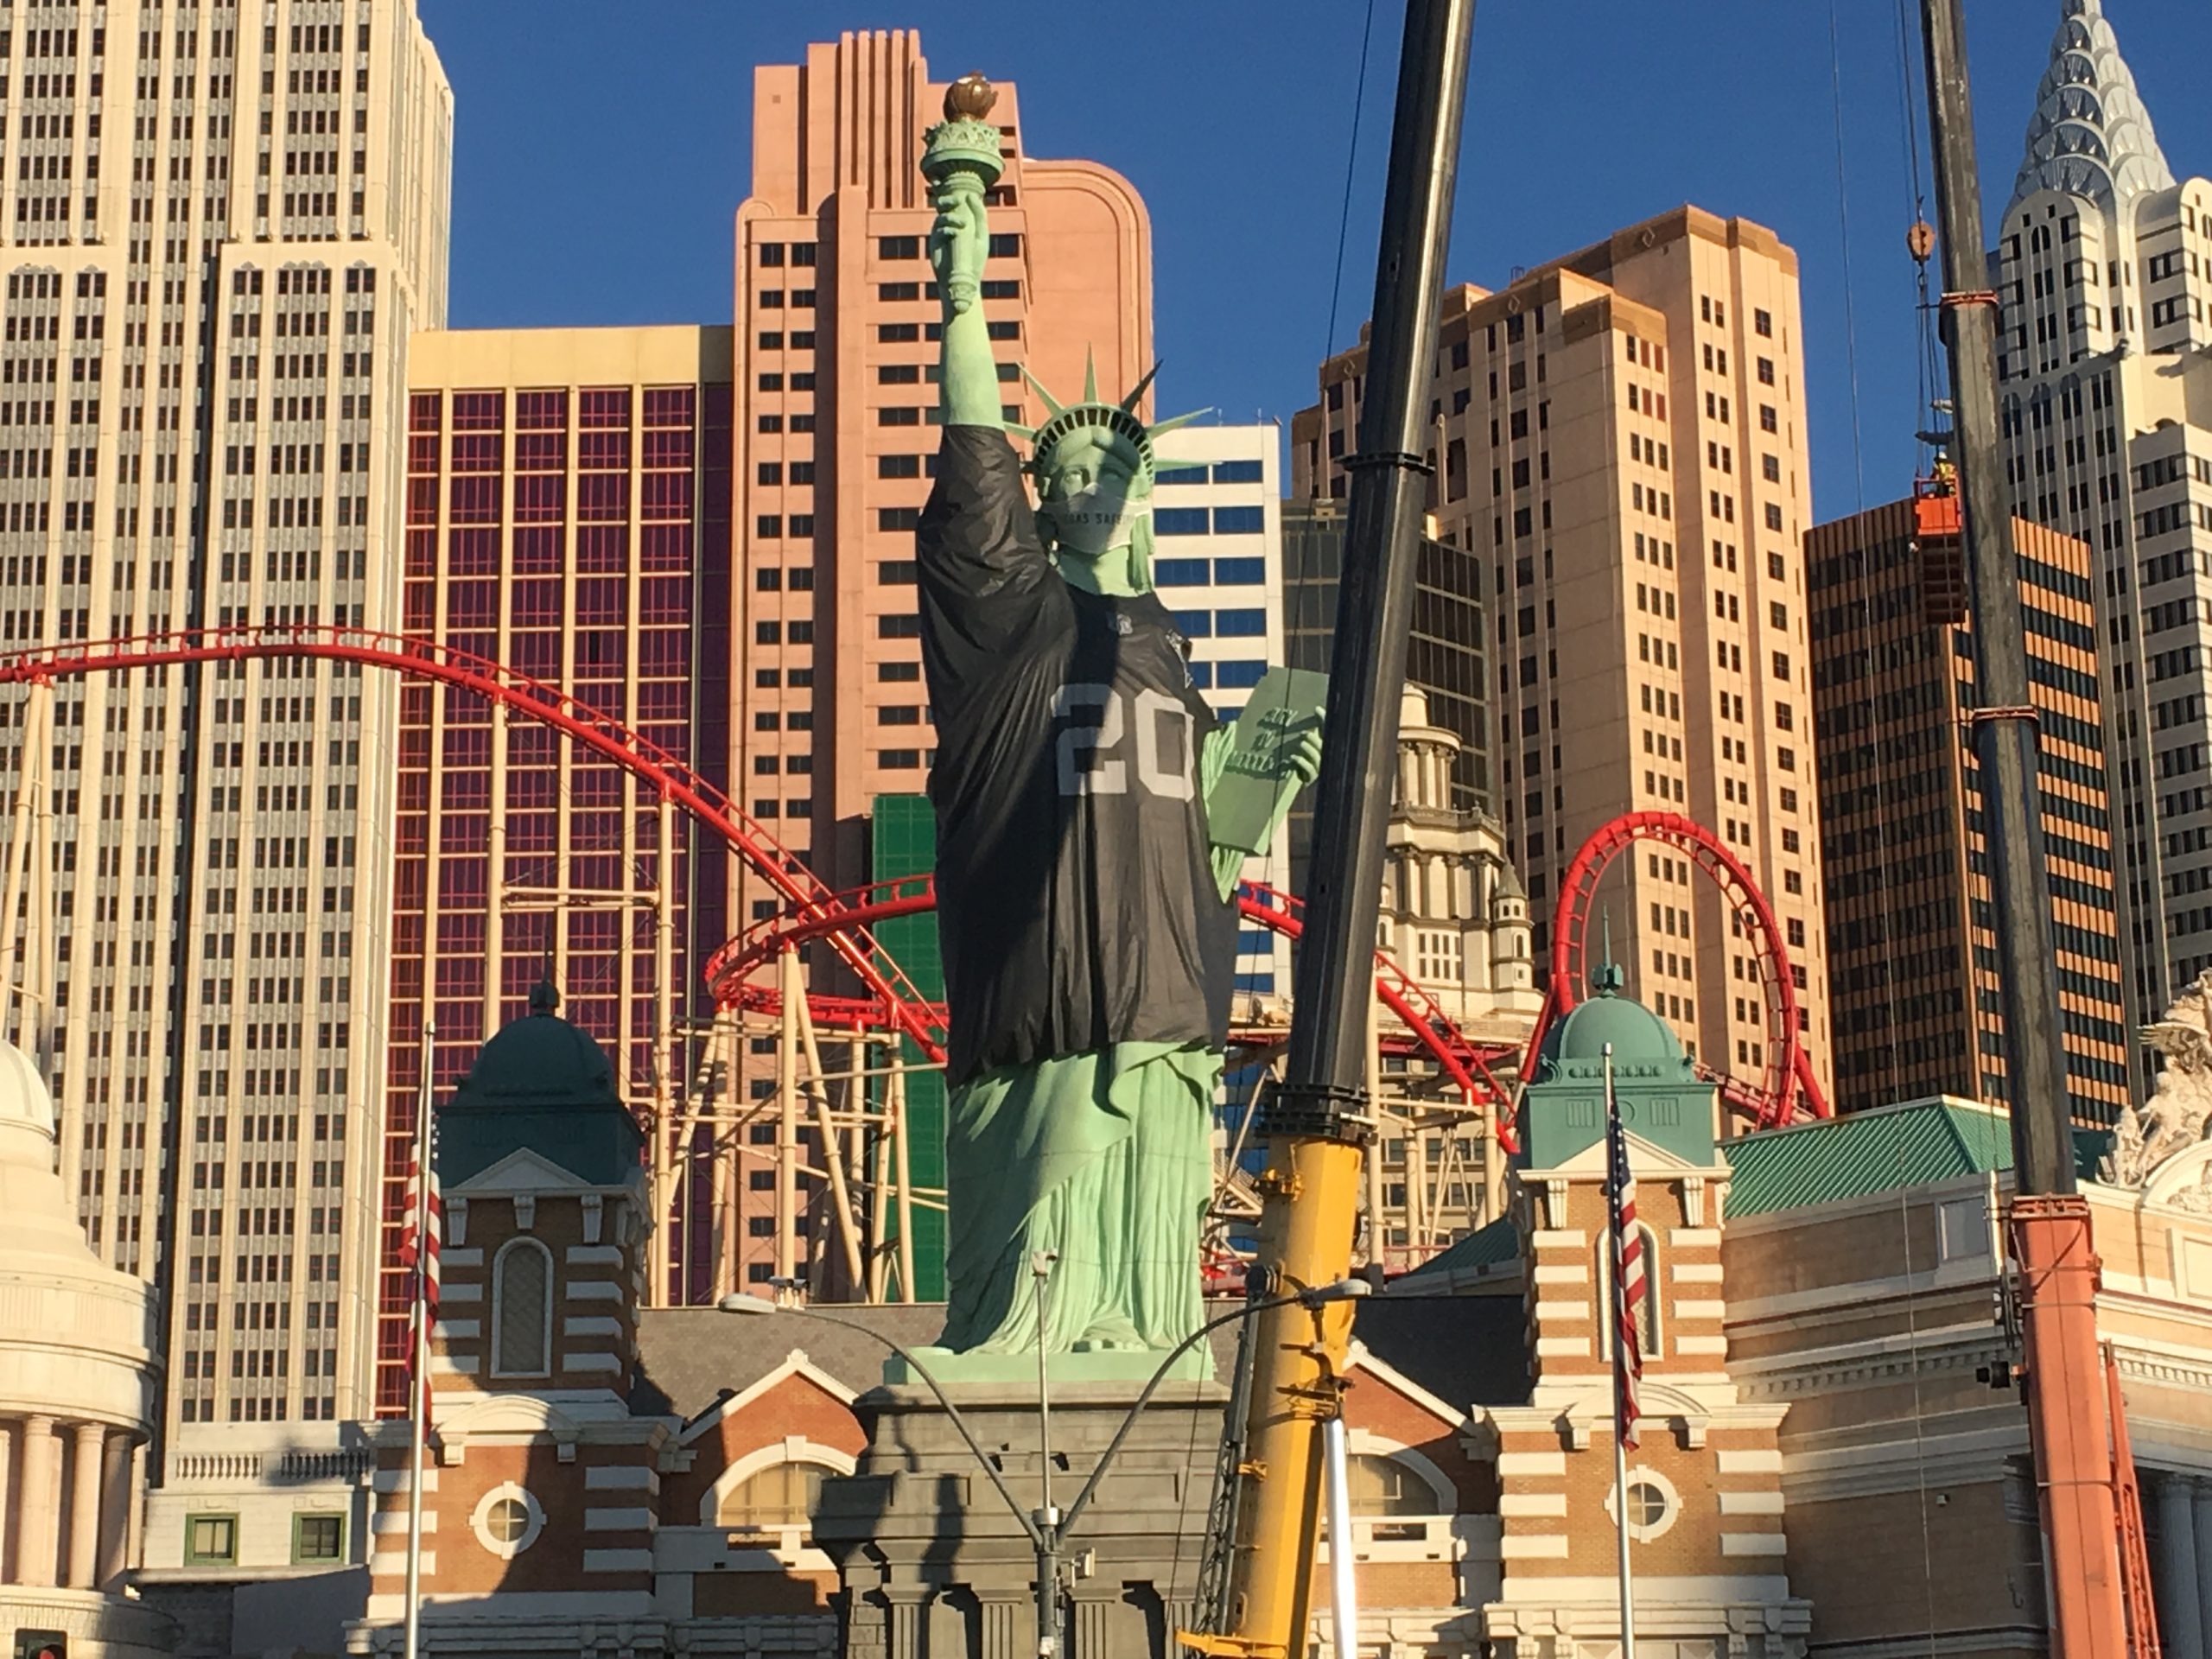 Statue of Liberty Dressed For Raiders and NFL Season During Pandemic -  LVSportsBiz